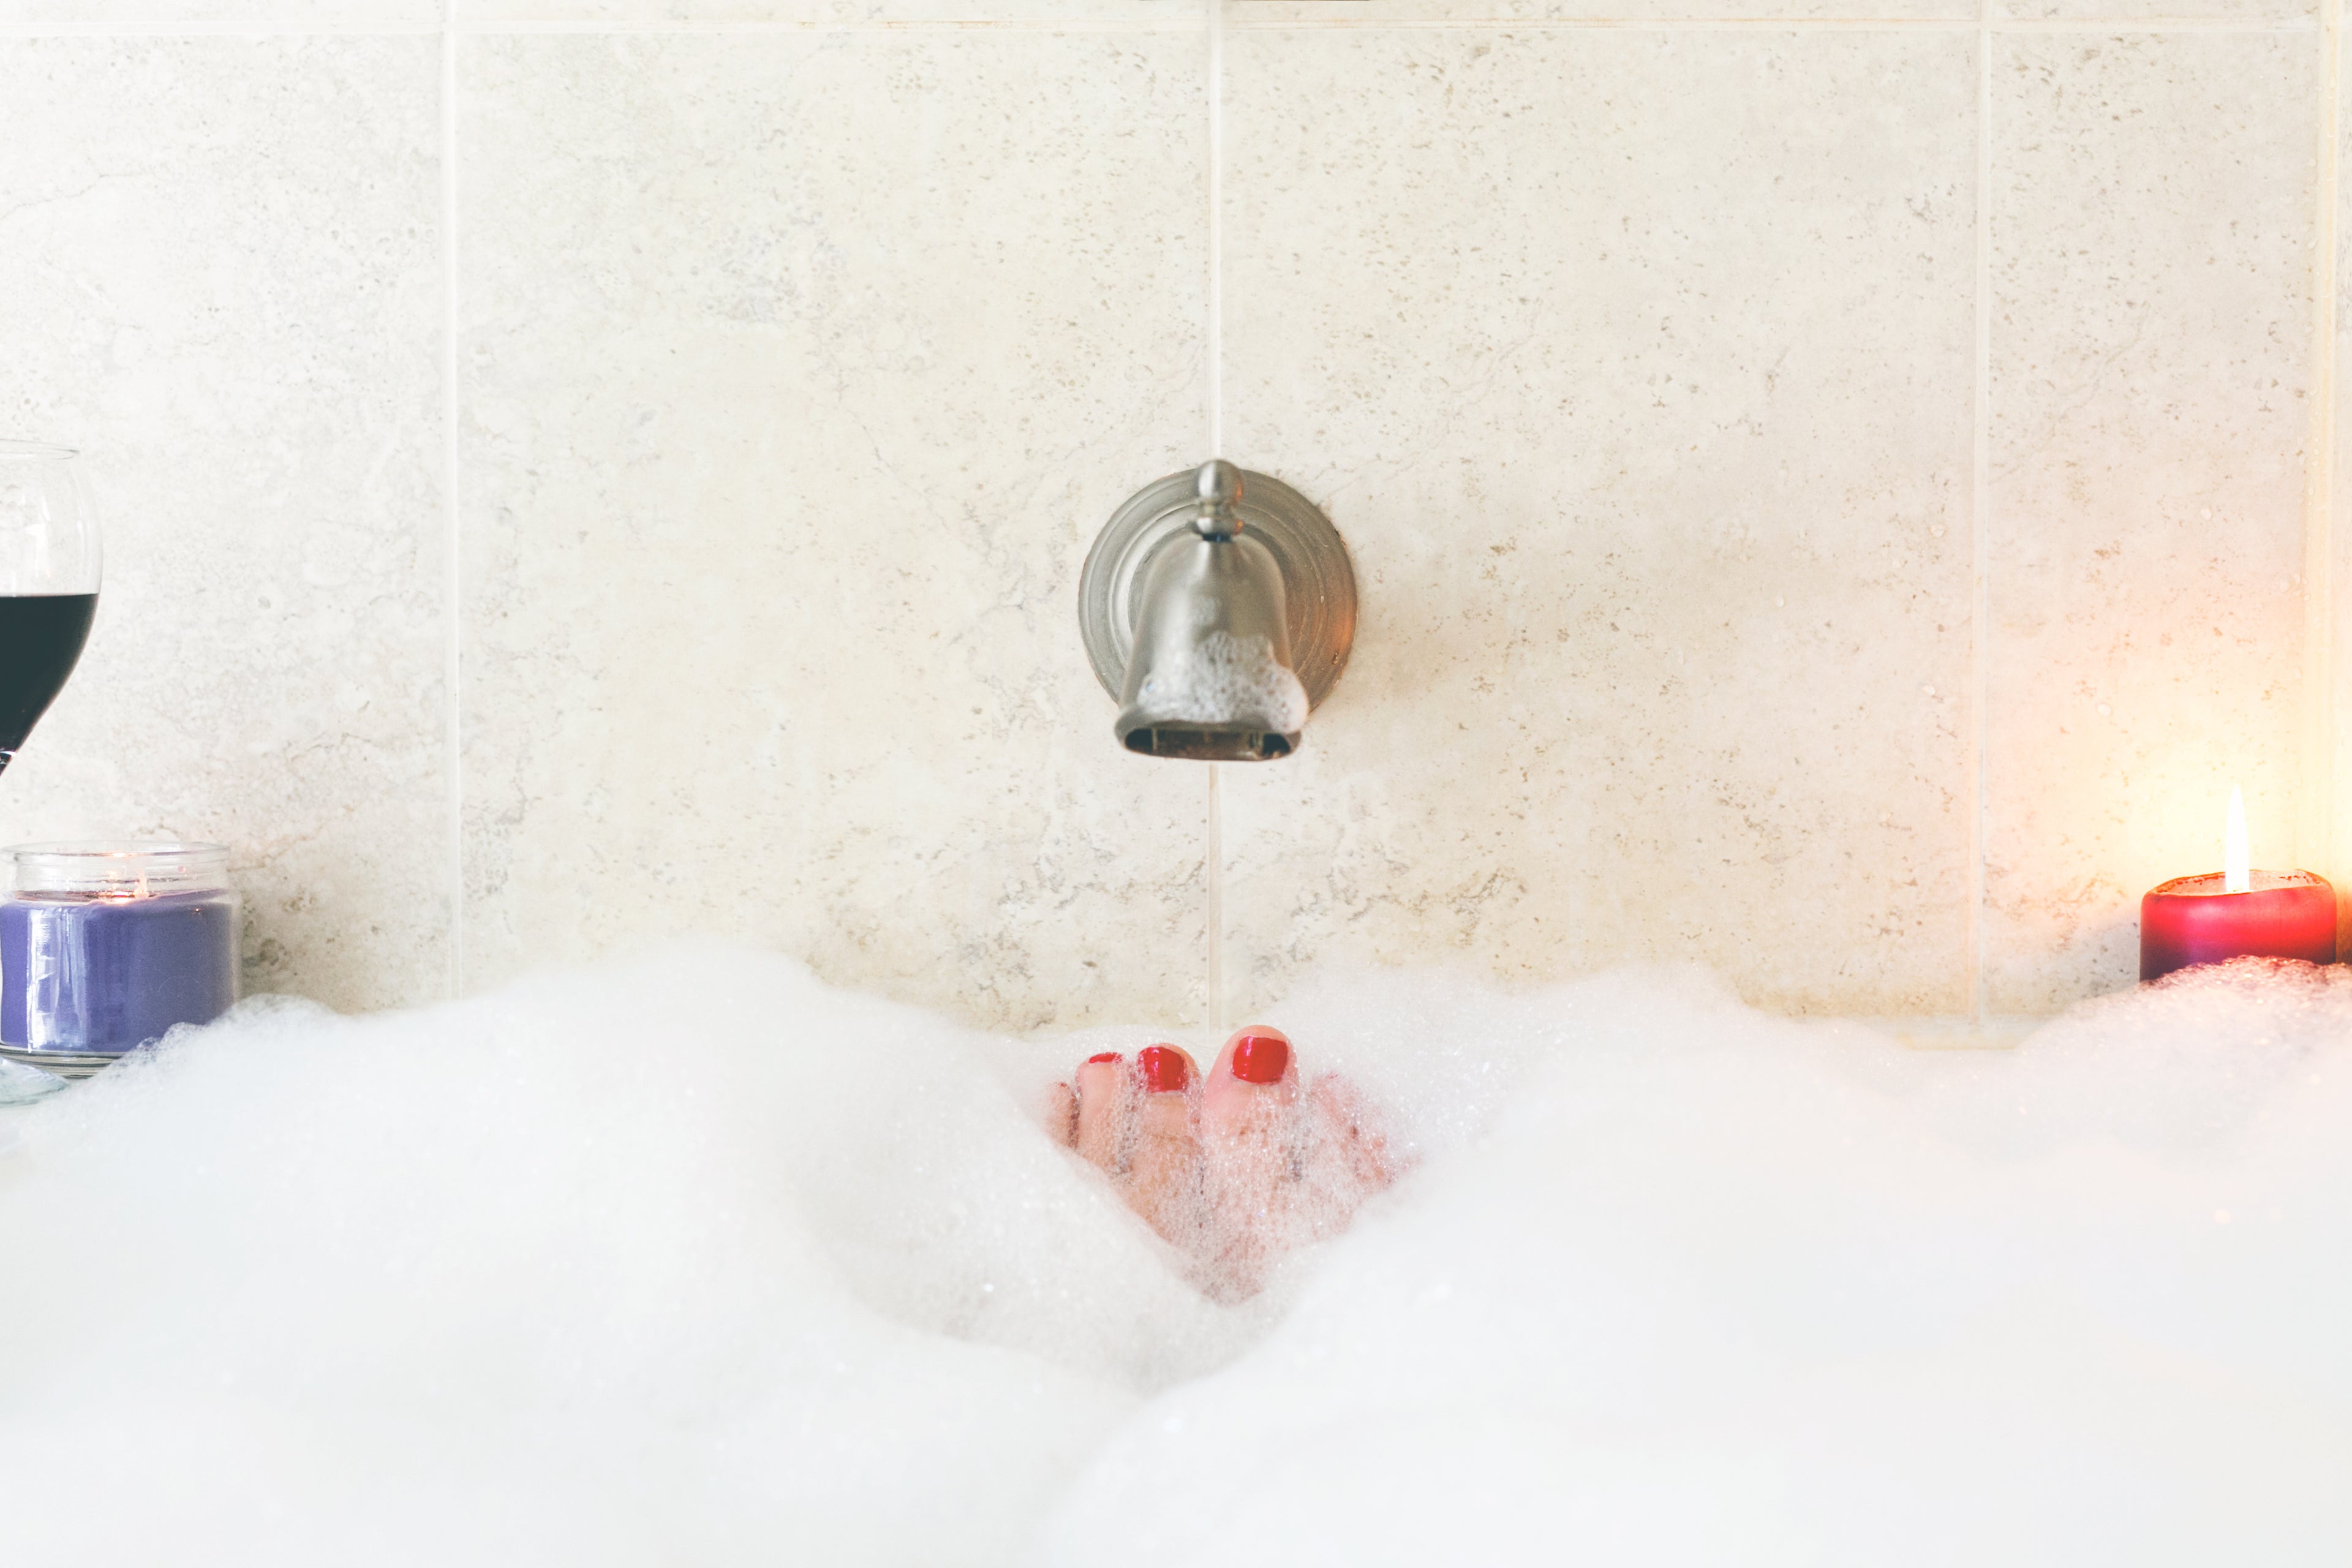 Aromatherapy bath bombs are a perfect way to get some self care in